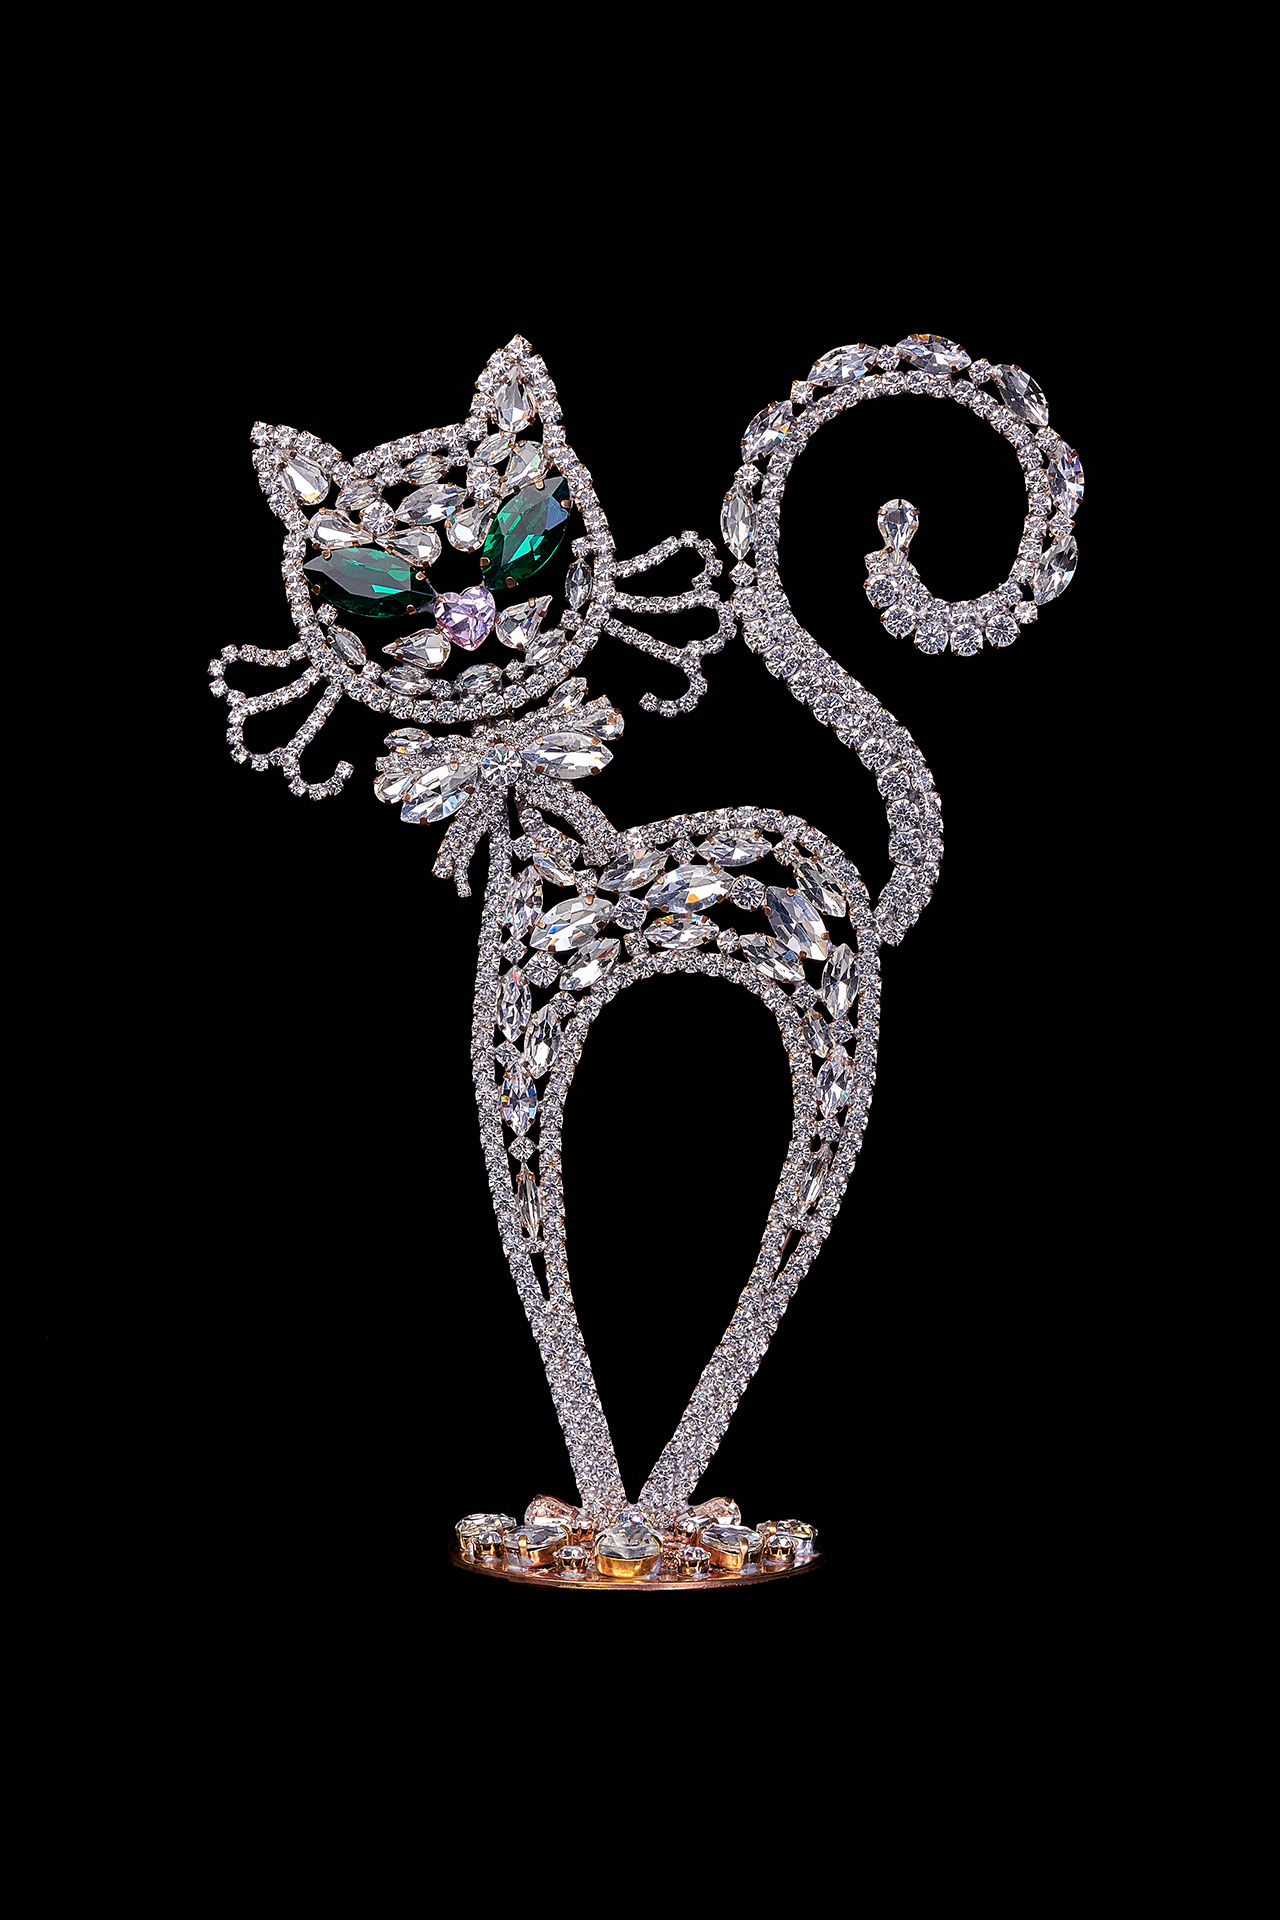 Rhinestones cat decoration handmade from clear glimmering crystals